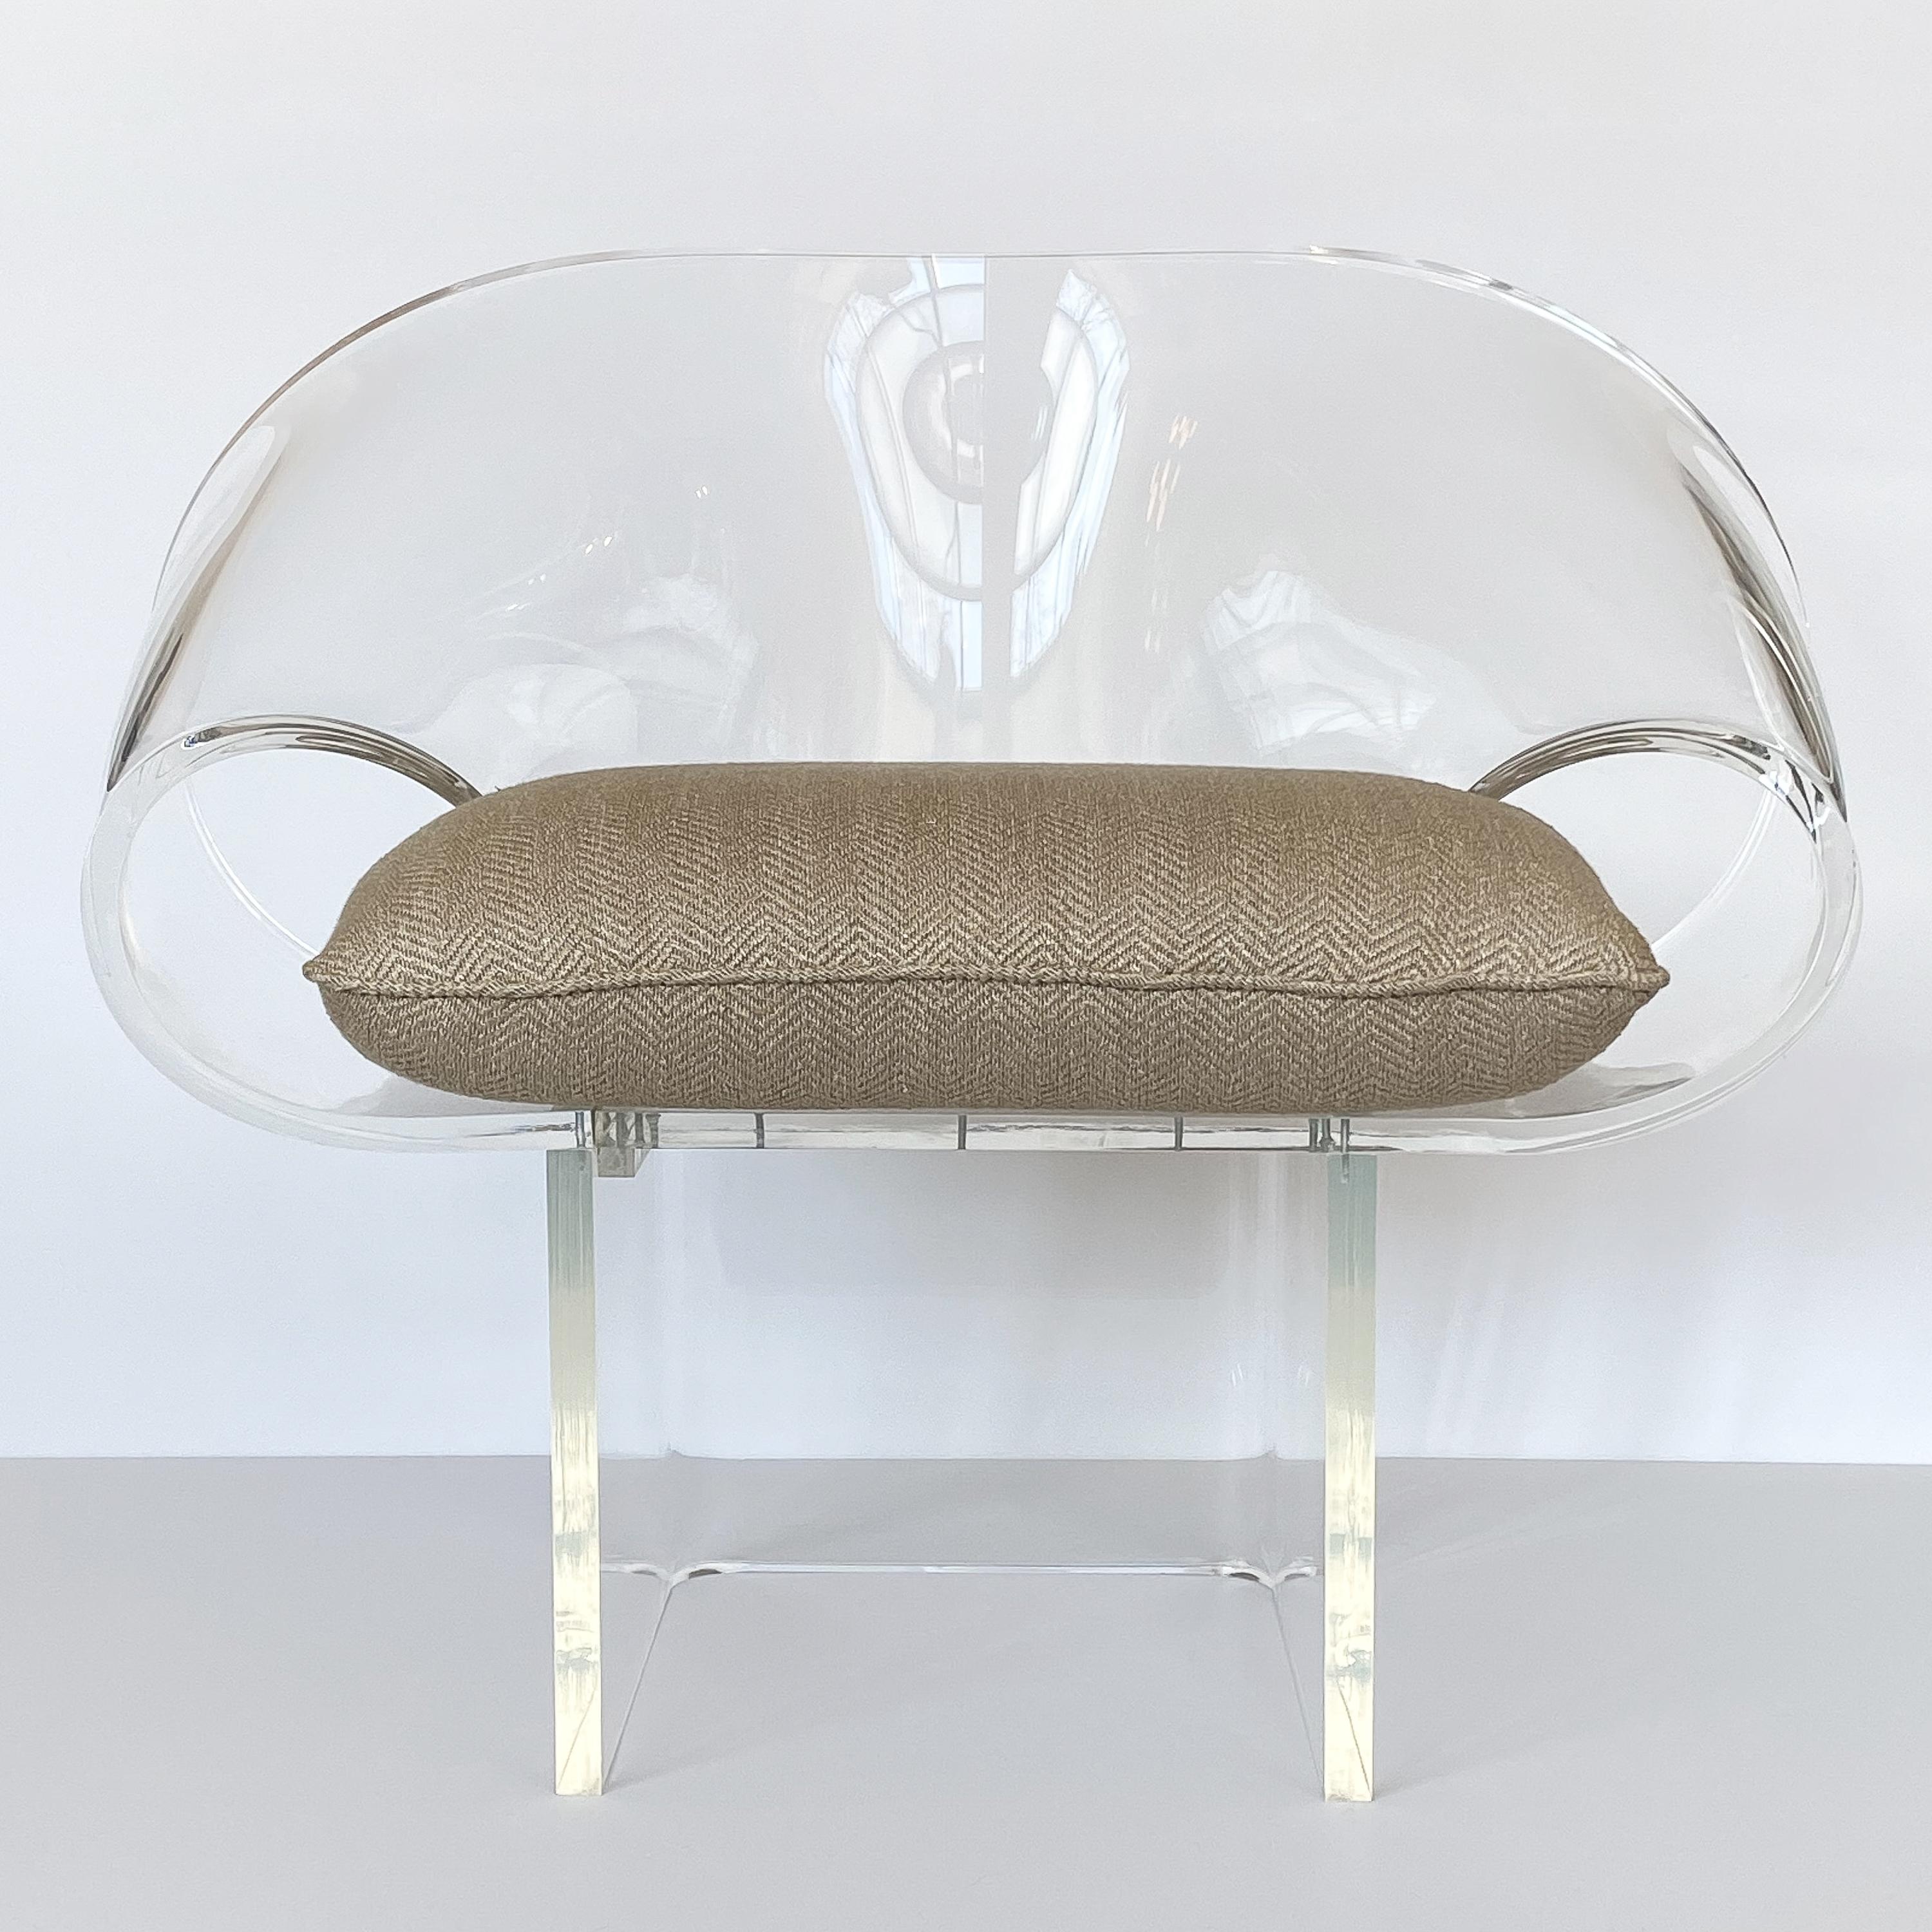 Late 20th Century Robert Van Horn Lucite Ribbon Lounge Chair, Signed